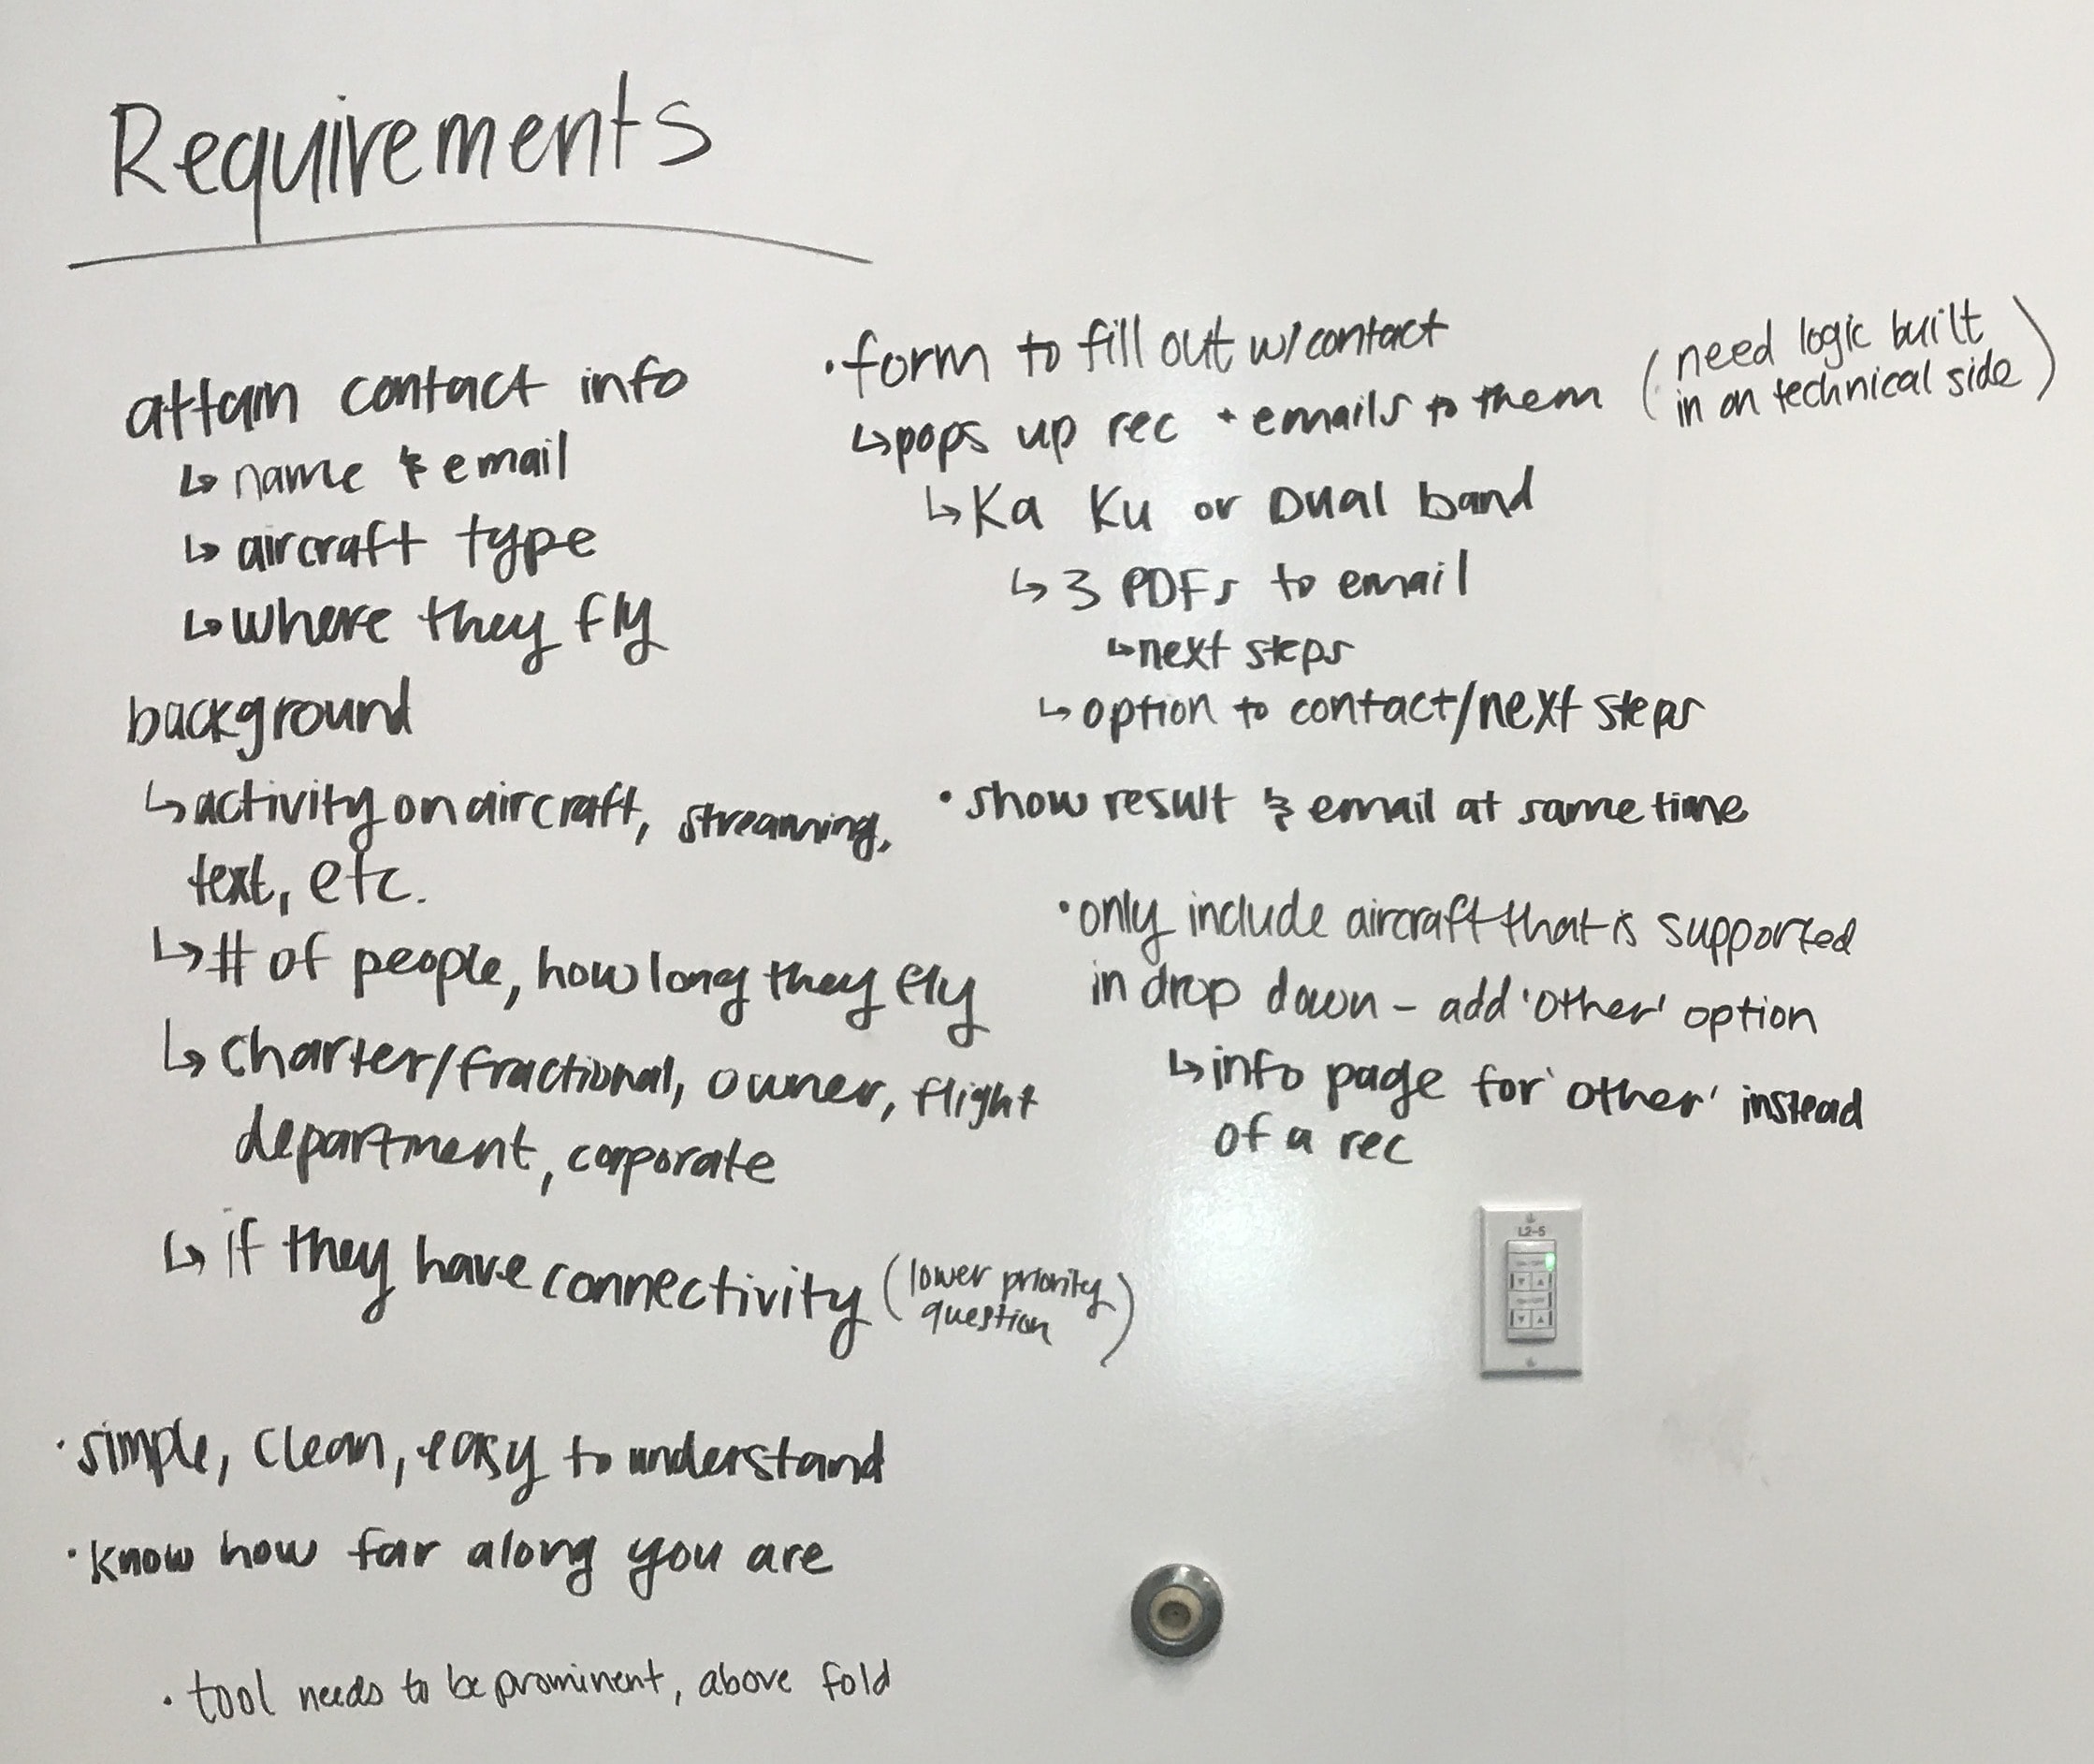 whiteboard writing from common understanding session